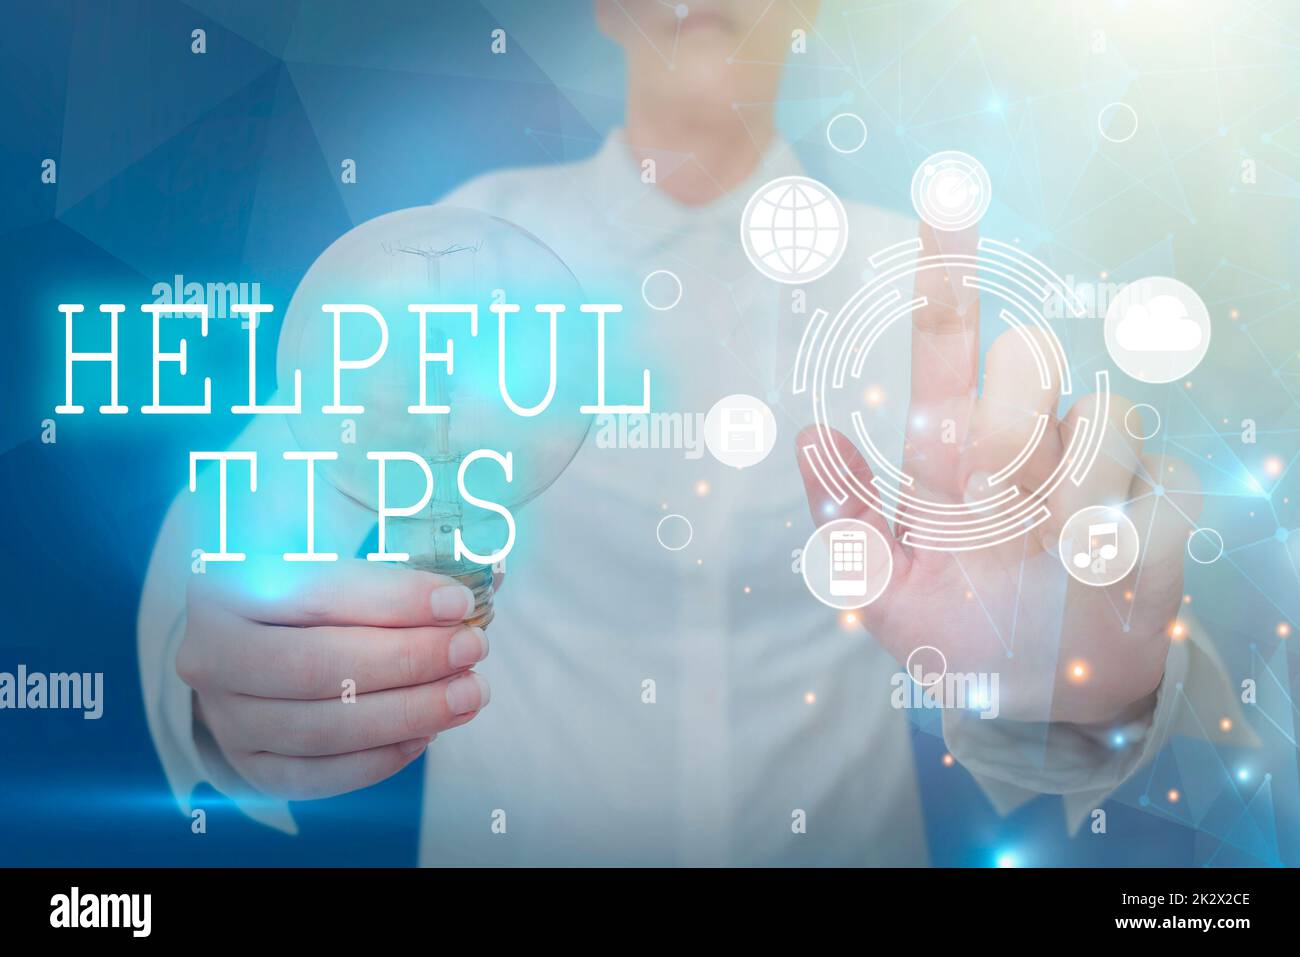 Writing displaying text Helpful Tips. Internet Concept Ask an Expert Solutions Hints Consulting Warning Lady holding light bulb pointing finger upwards symbolizing success. Stock Photo